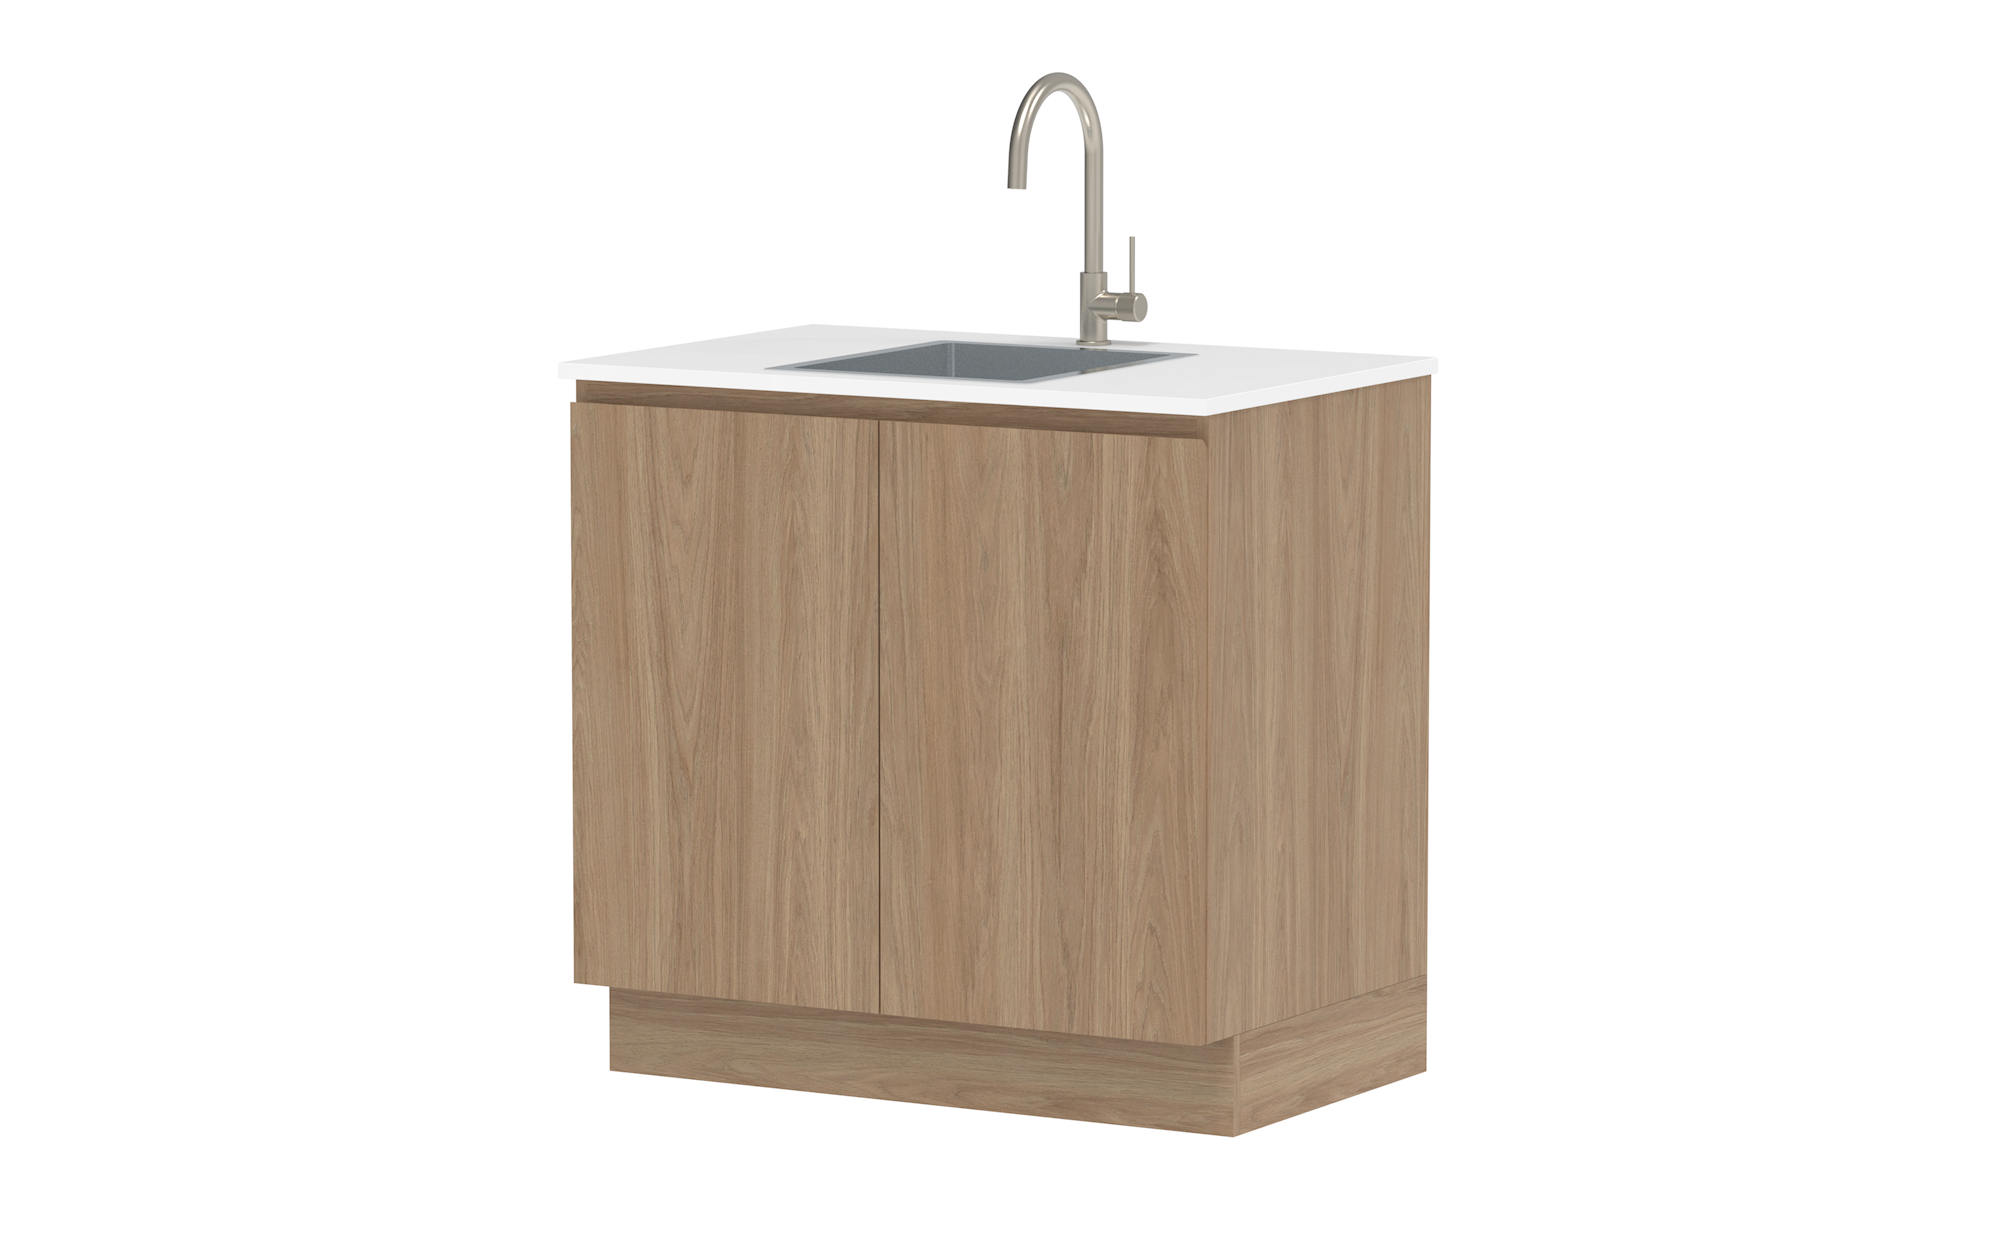 With Clovelly Small Rectangular Sink